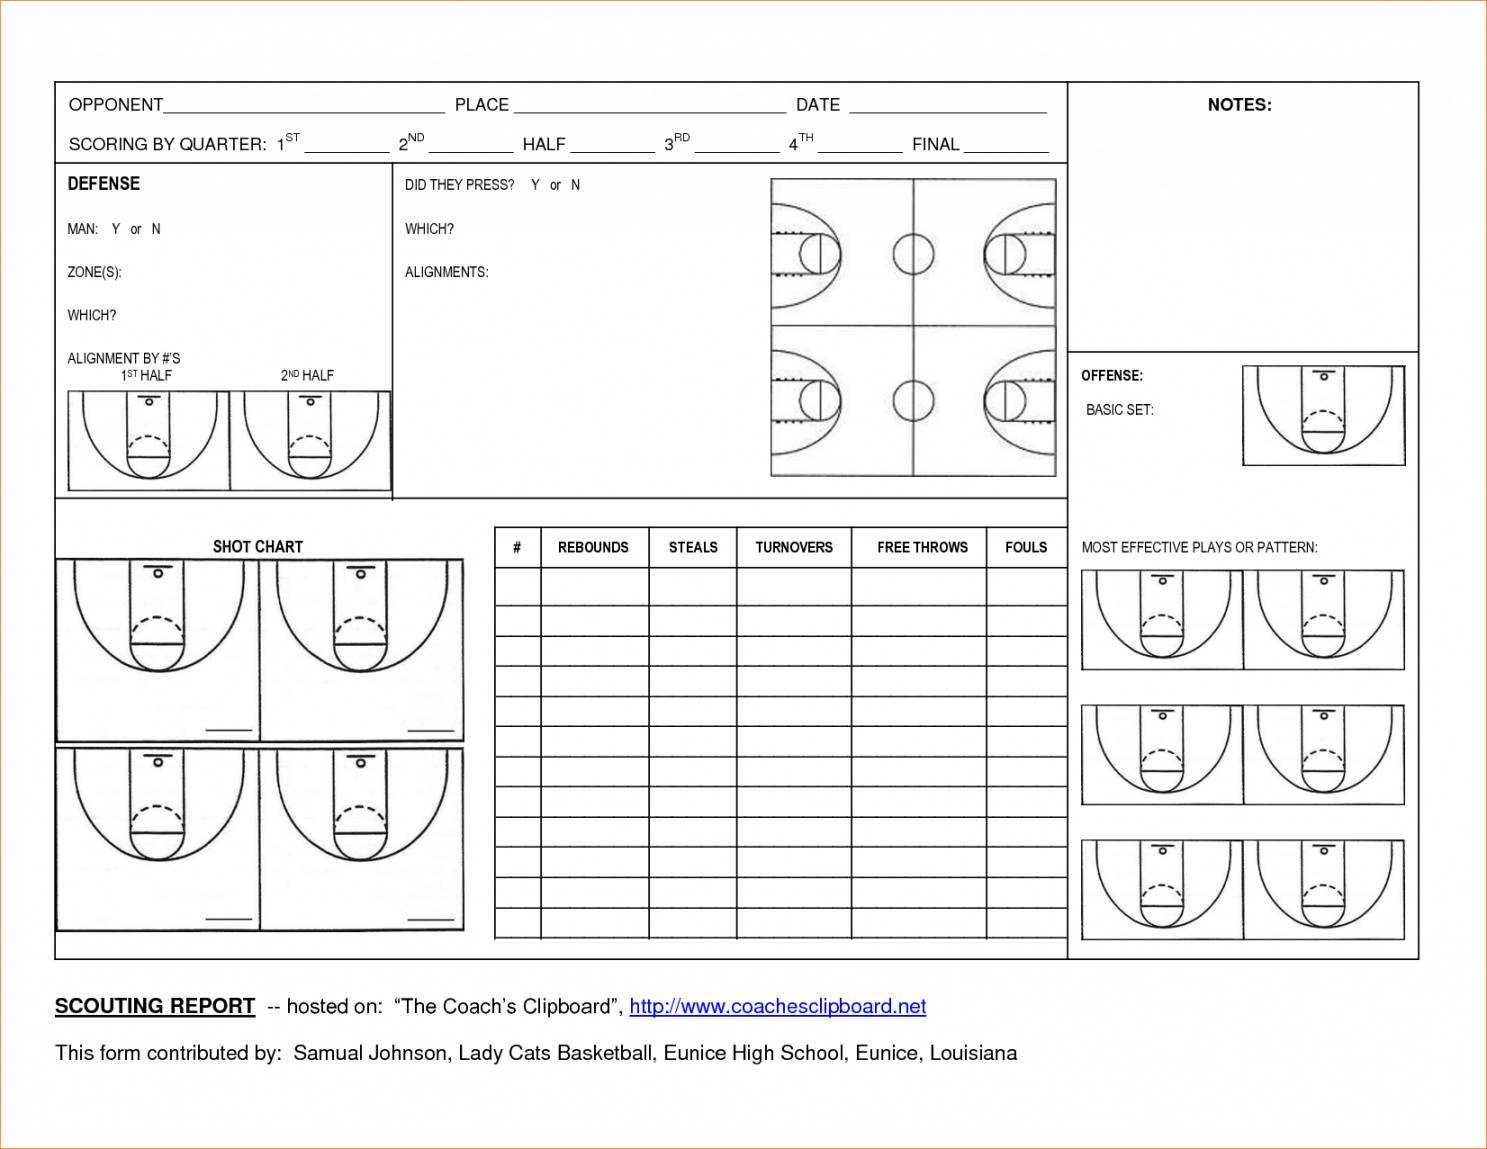 Editable Basketball Scouting Report Template Dltemplates Inside Scouting Report Basketball Template